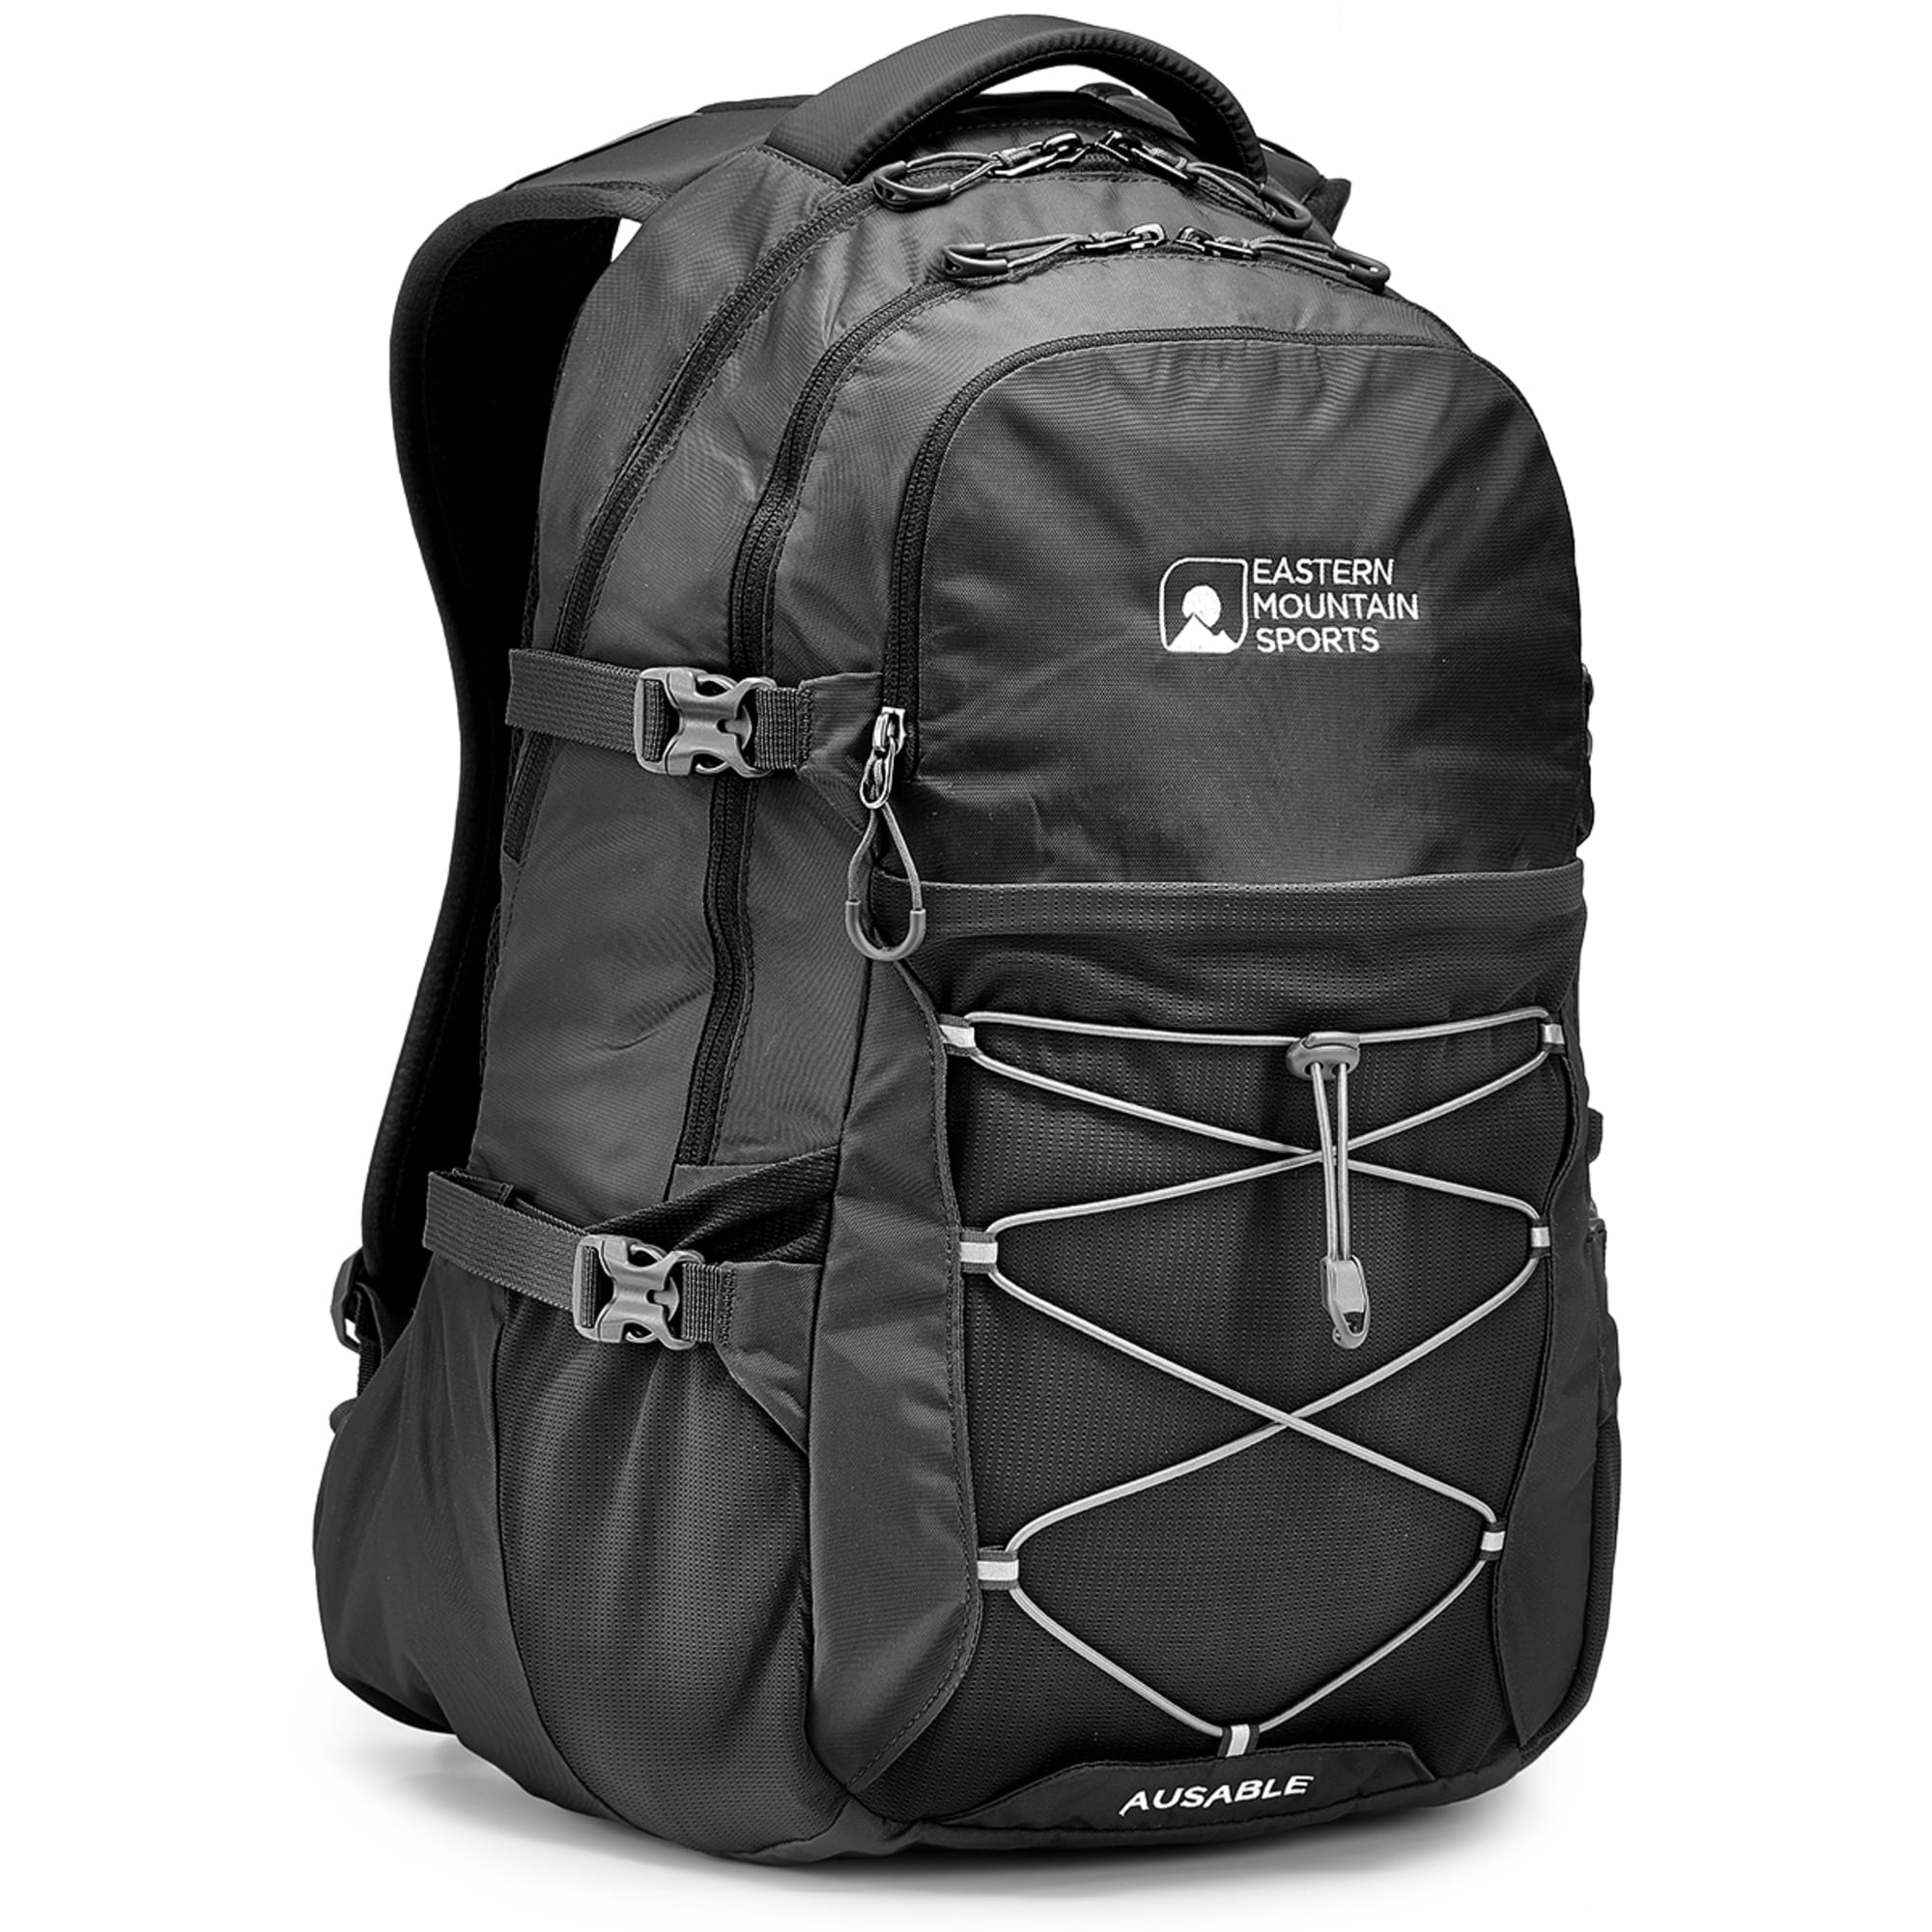 EMS Ausable Daypack - Eastern Mountain Sports